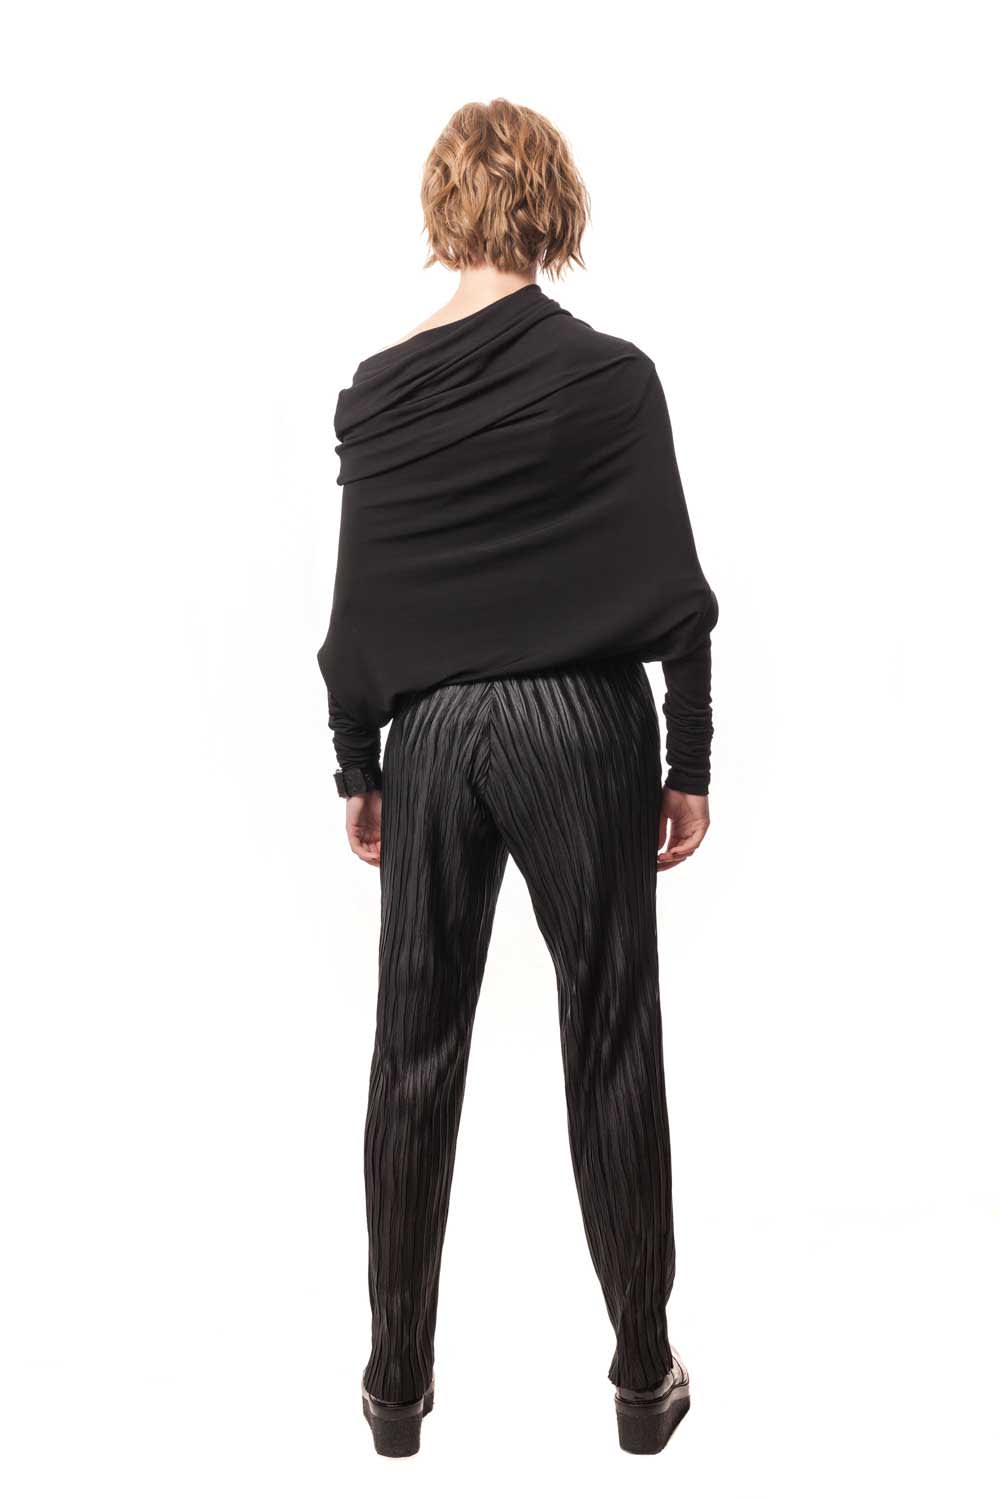 Black pleated Peg Leg Pants, the Minori Pants are a stylish, easy to wear addition to your wardrobe. 